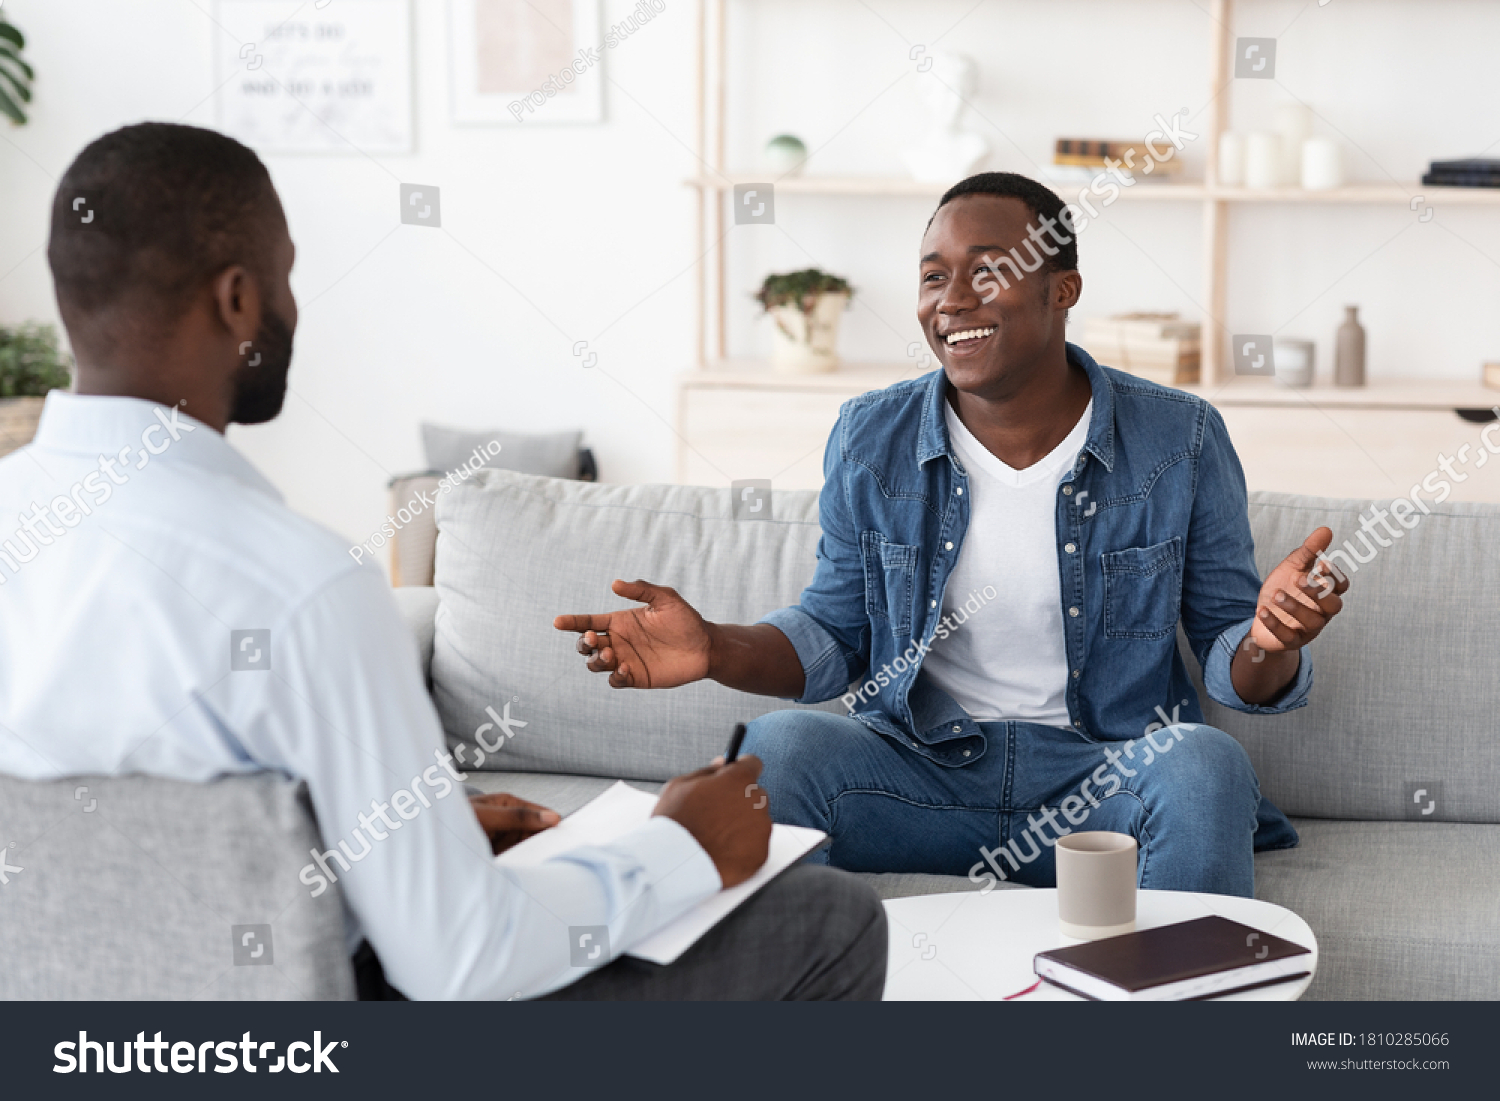 Successful Therapy. Cheerful black man talking to psychologist on meeting at his office, sharing his progress with doctor #1810285066